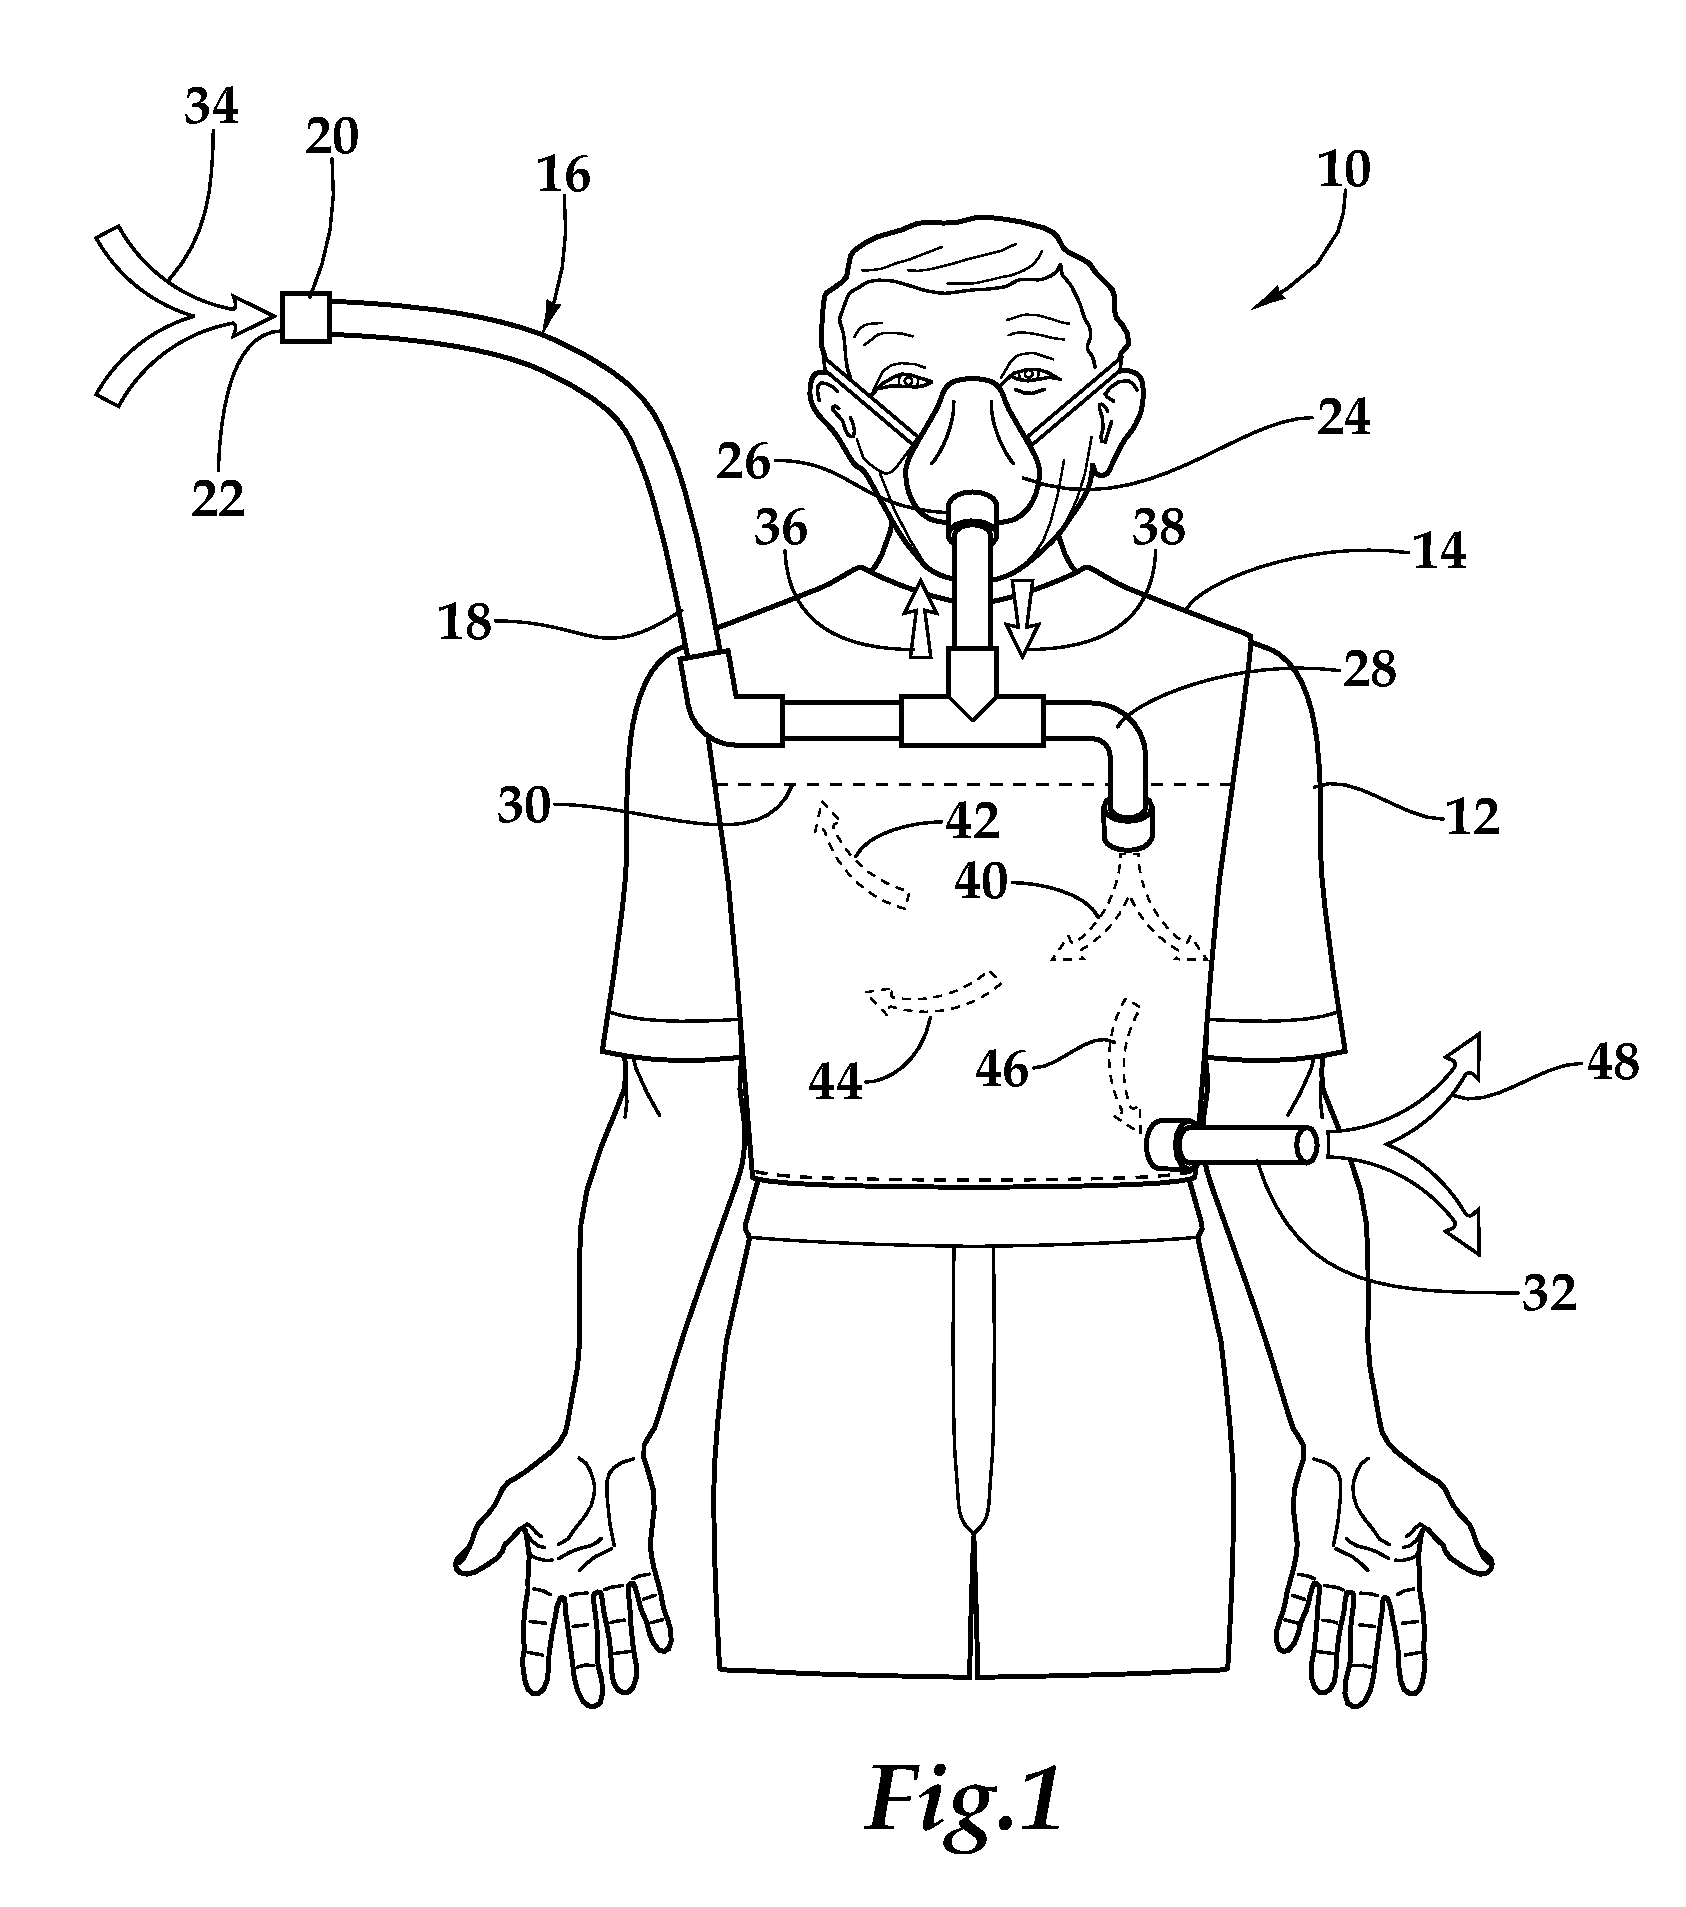 Circulation Apparatus and Method for Use of Same